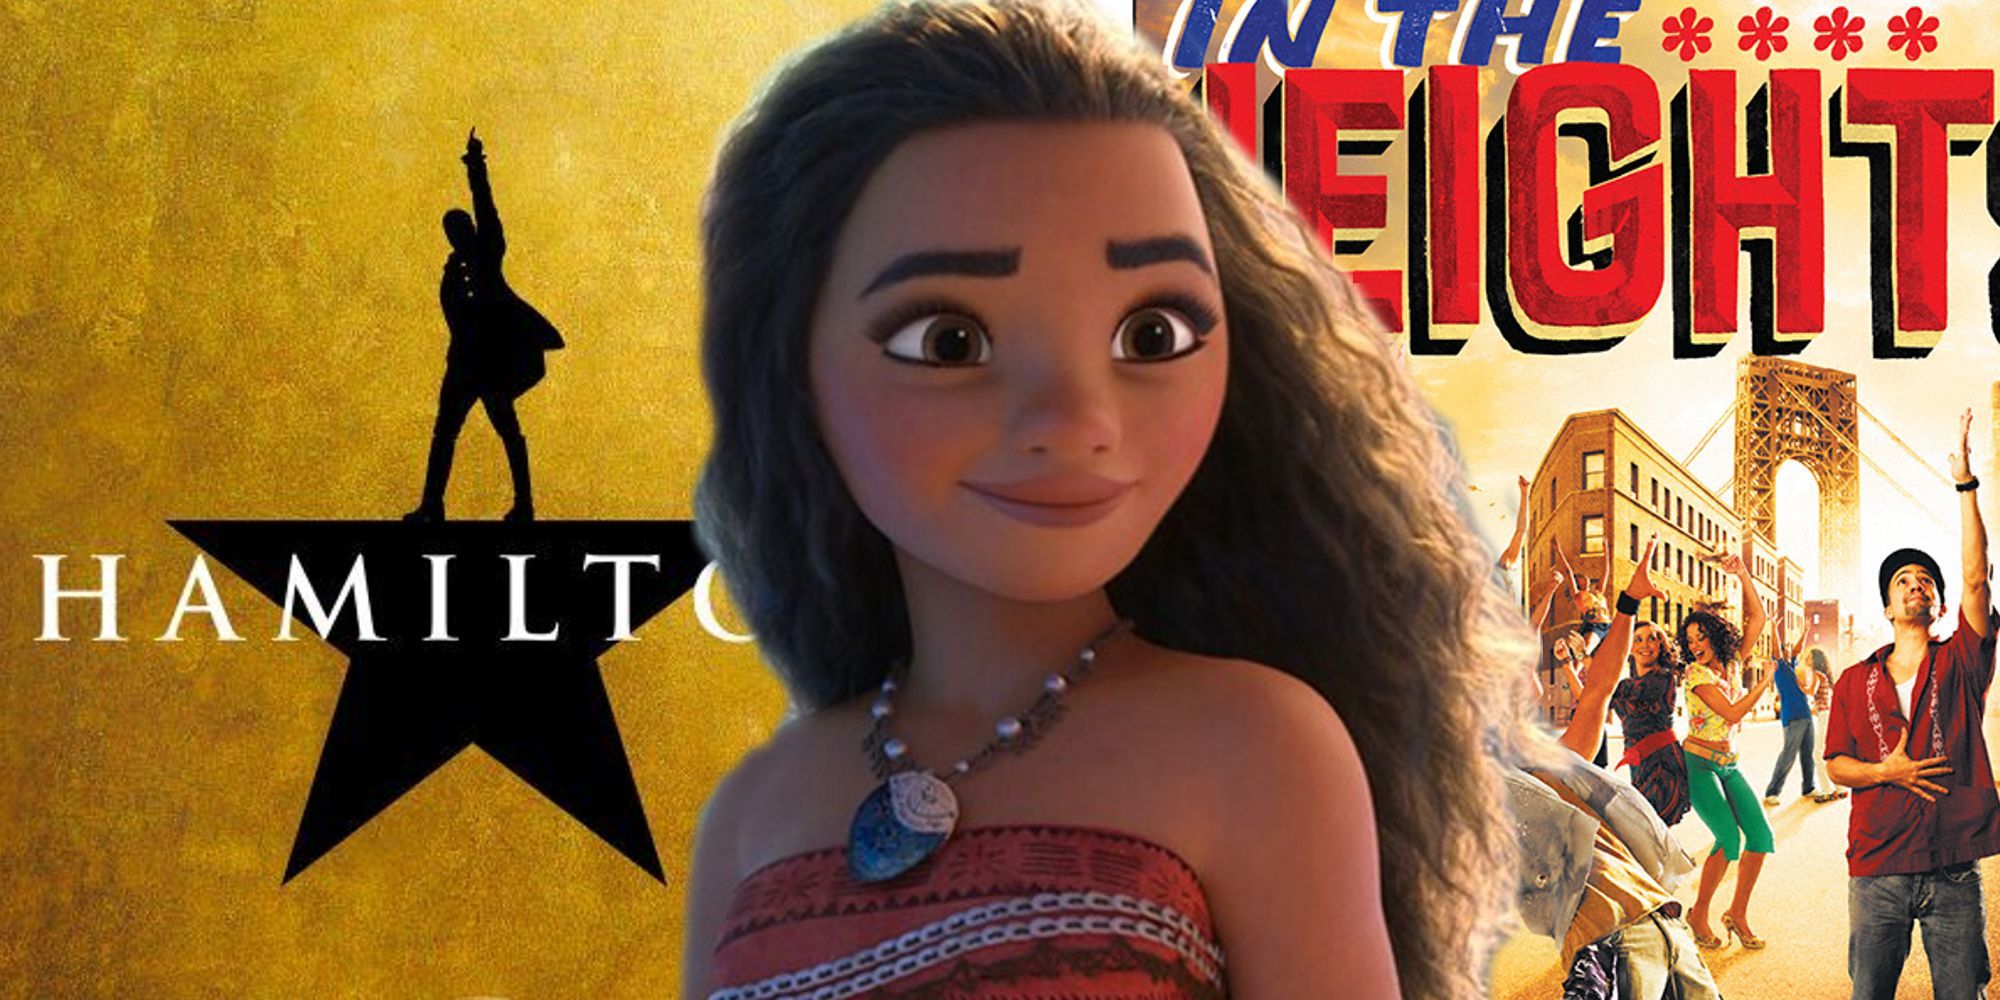 Moana smiling in the center with Hamilton and In The Heights poster in the background